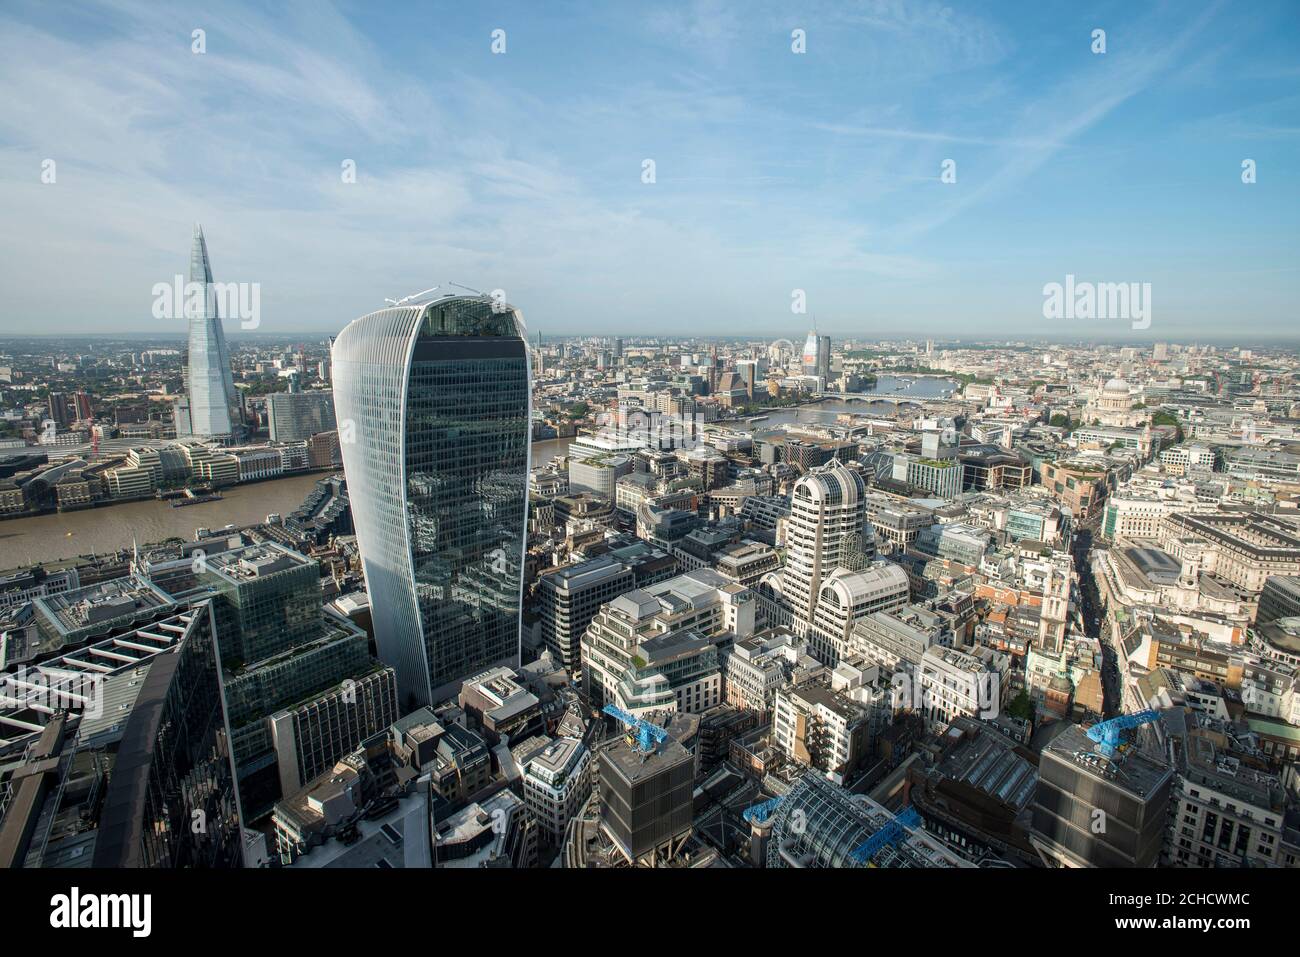 View from top of the Scalpel looking west along the River Thames. The Walkie-Talkie is prominent in the foreground. London Cityscapes and Skyline  201 Stock Photo